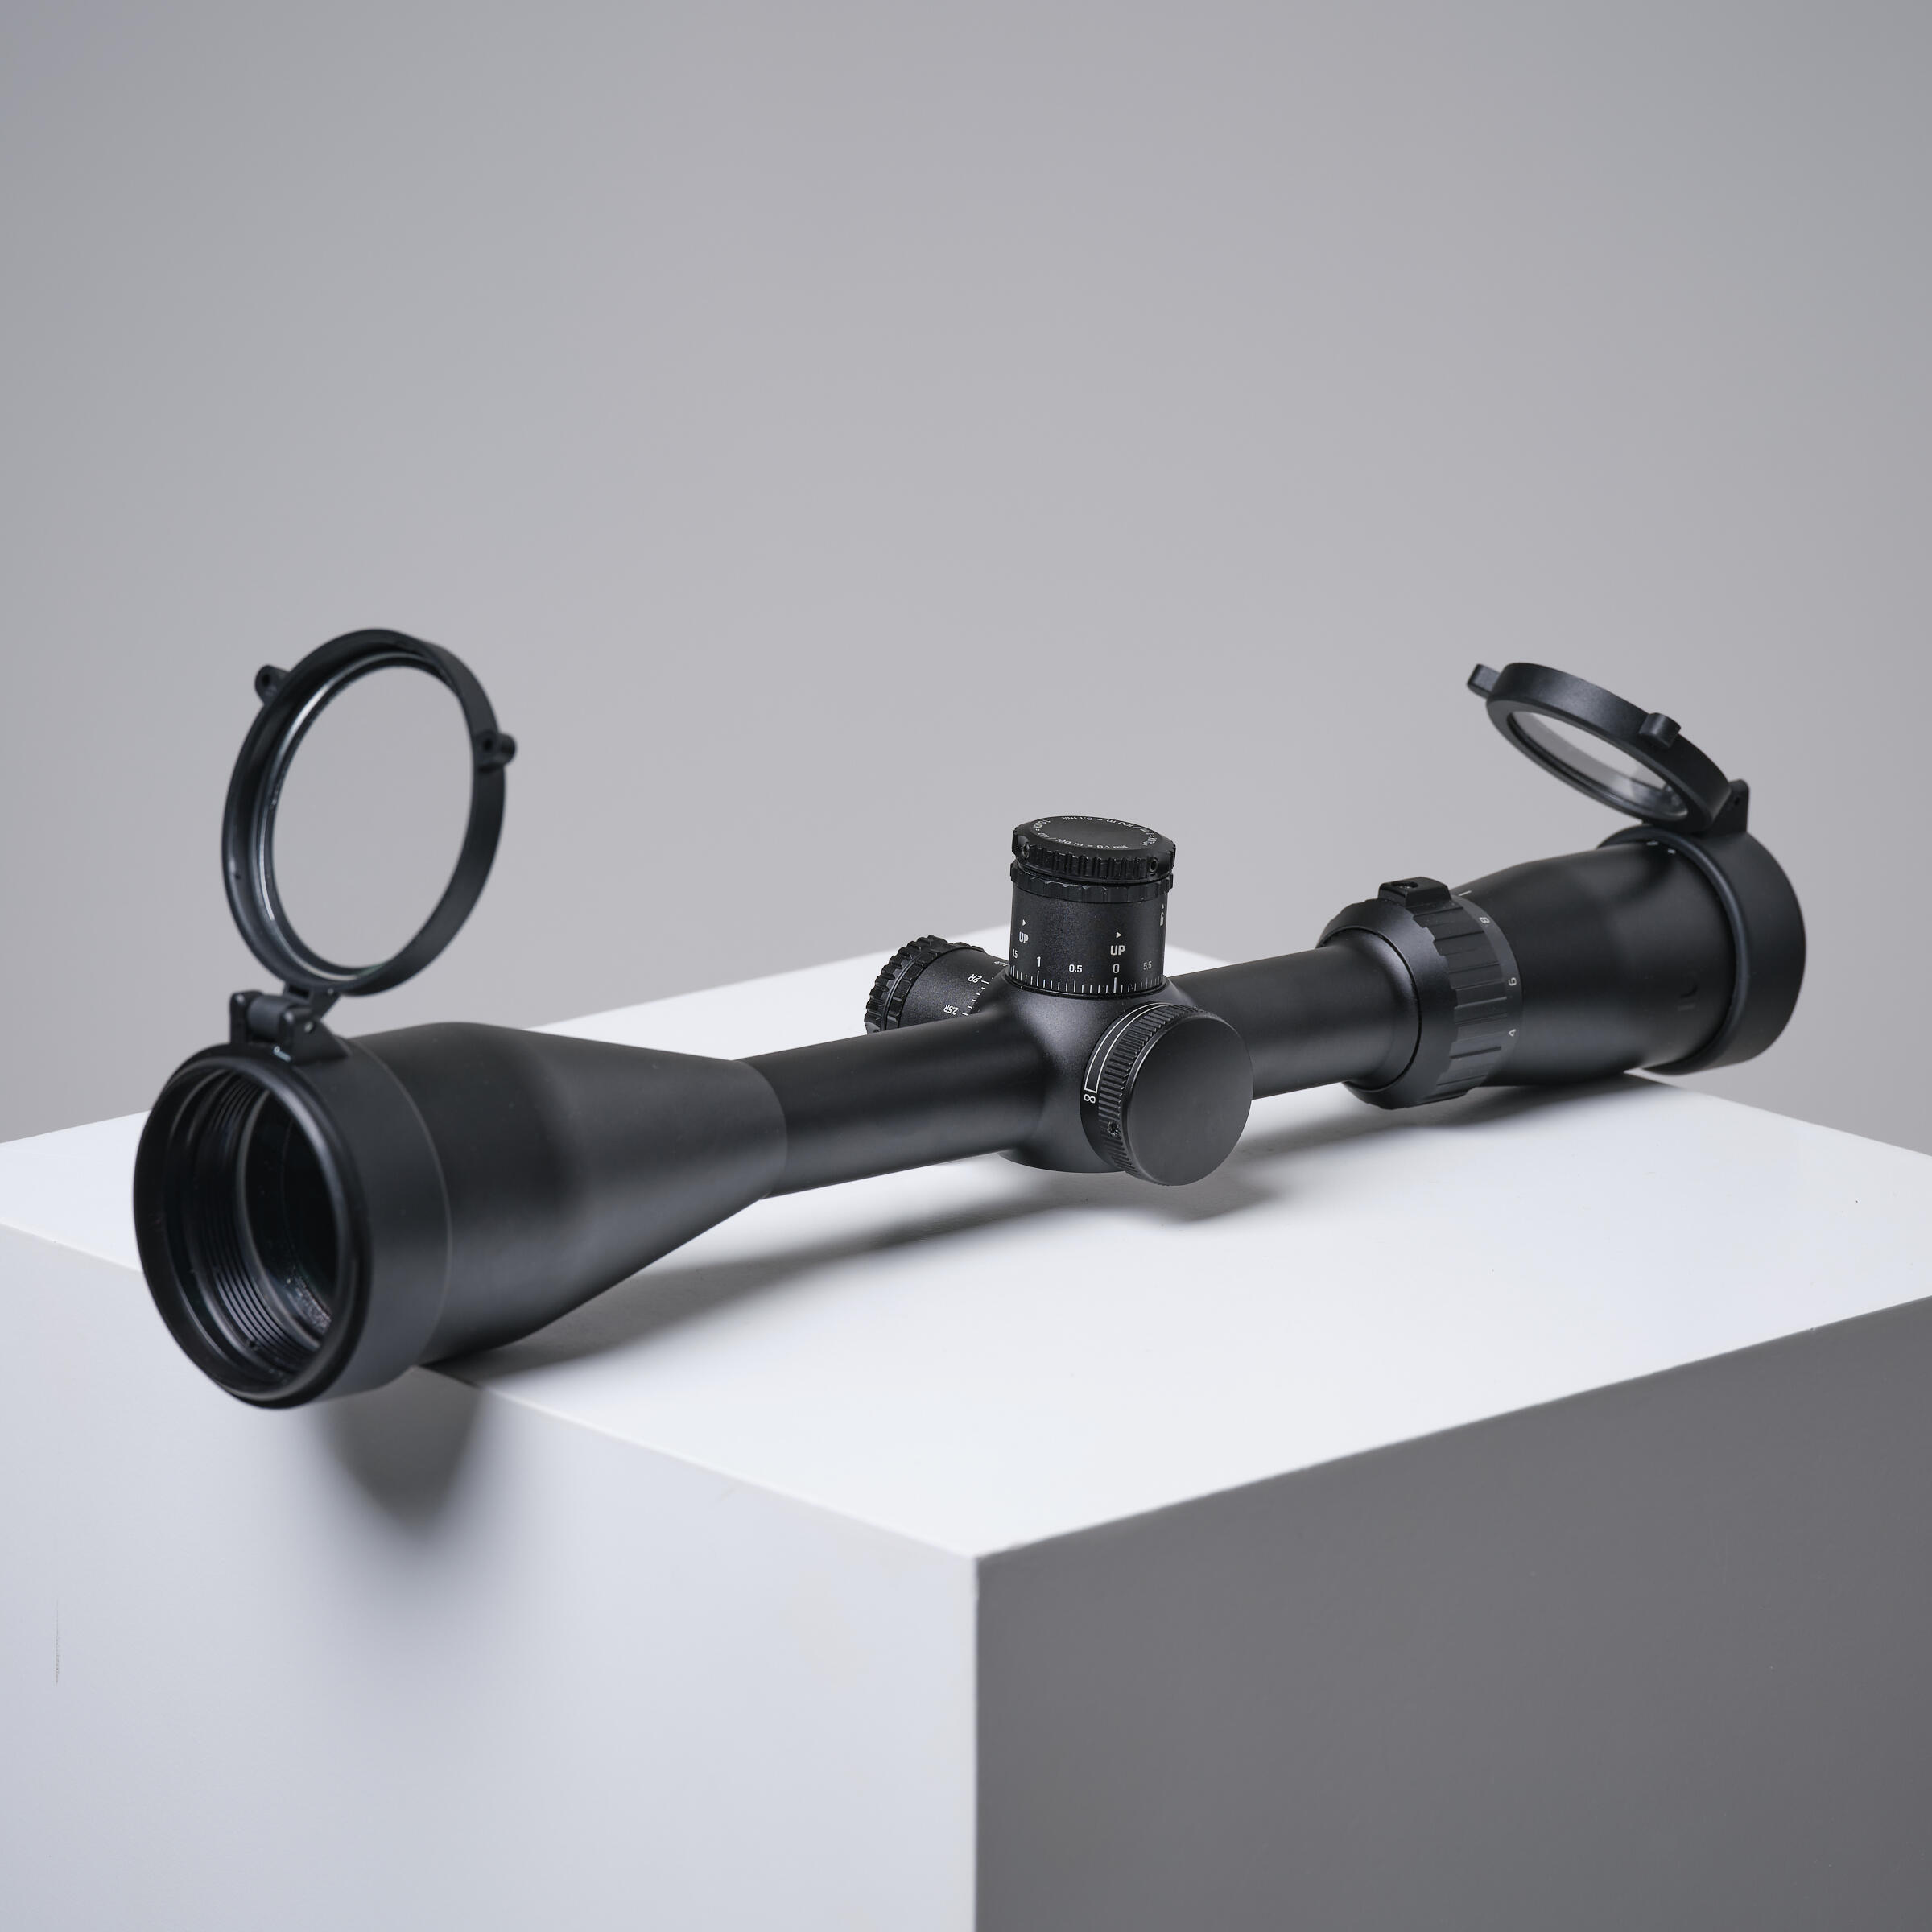 SOLOGNAC SCOPE 4-16X50 with adjustable parallax